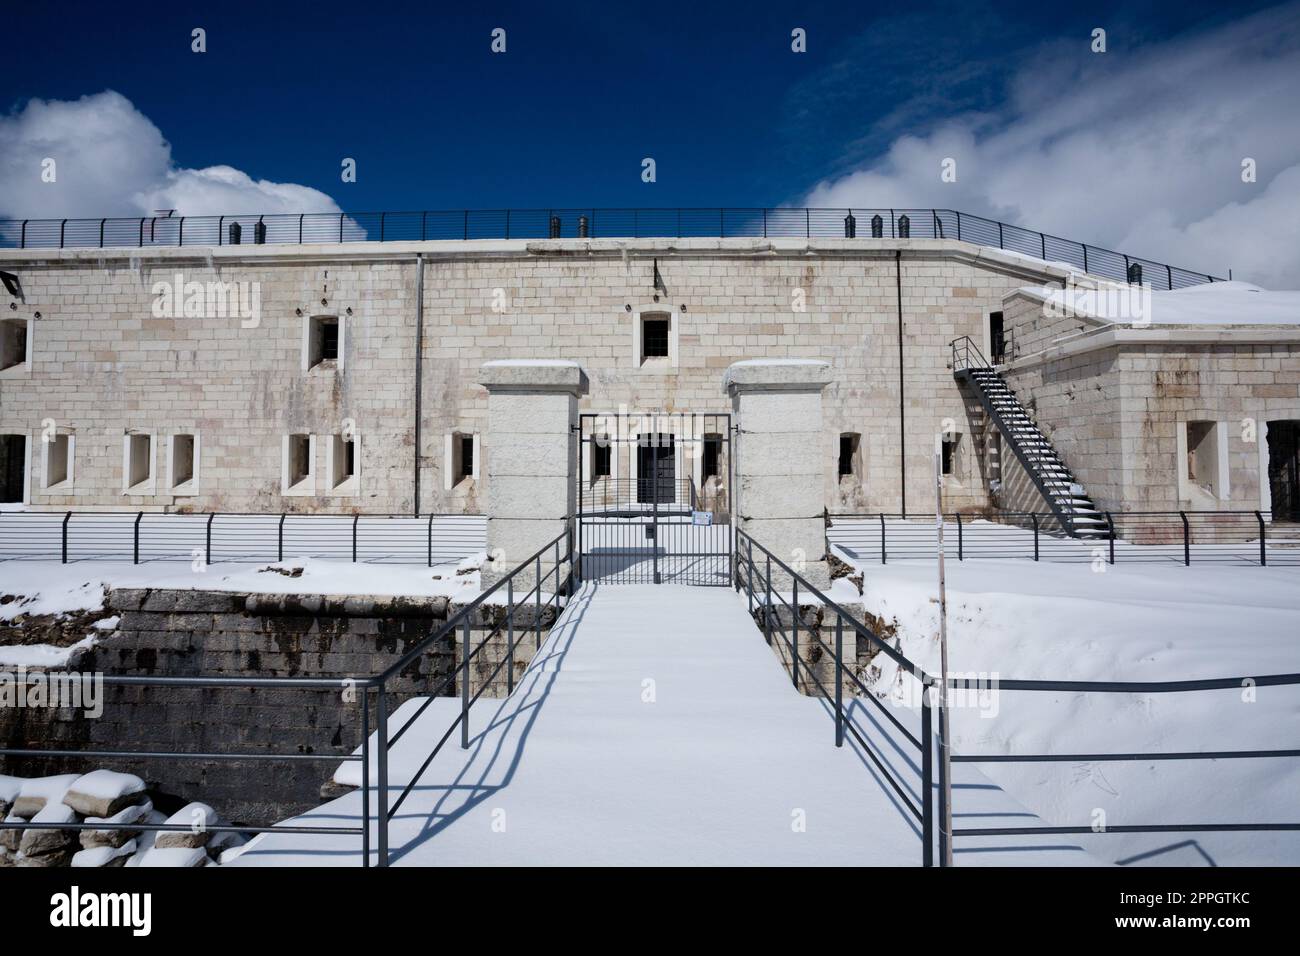 First world war fortified building, Lisser fort, Asiago Stock Photo